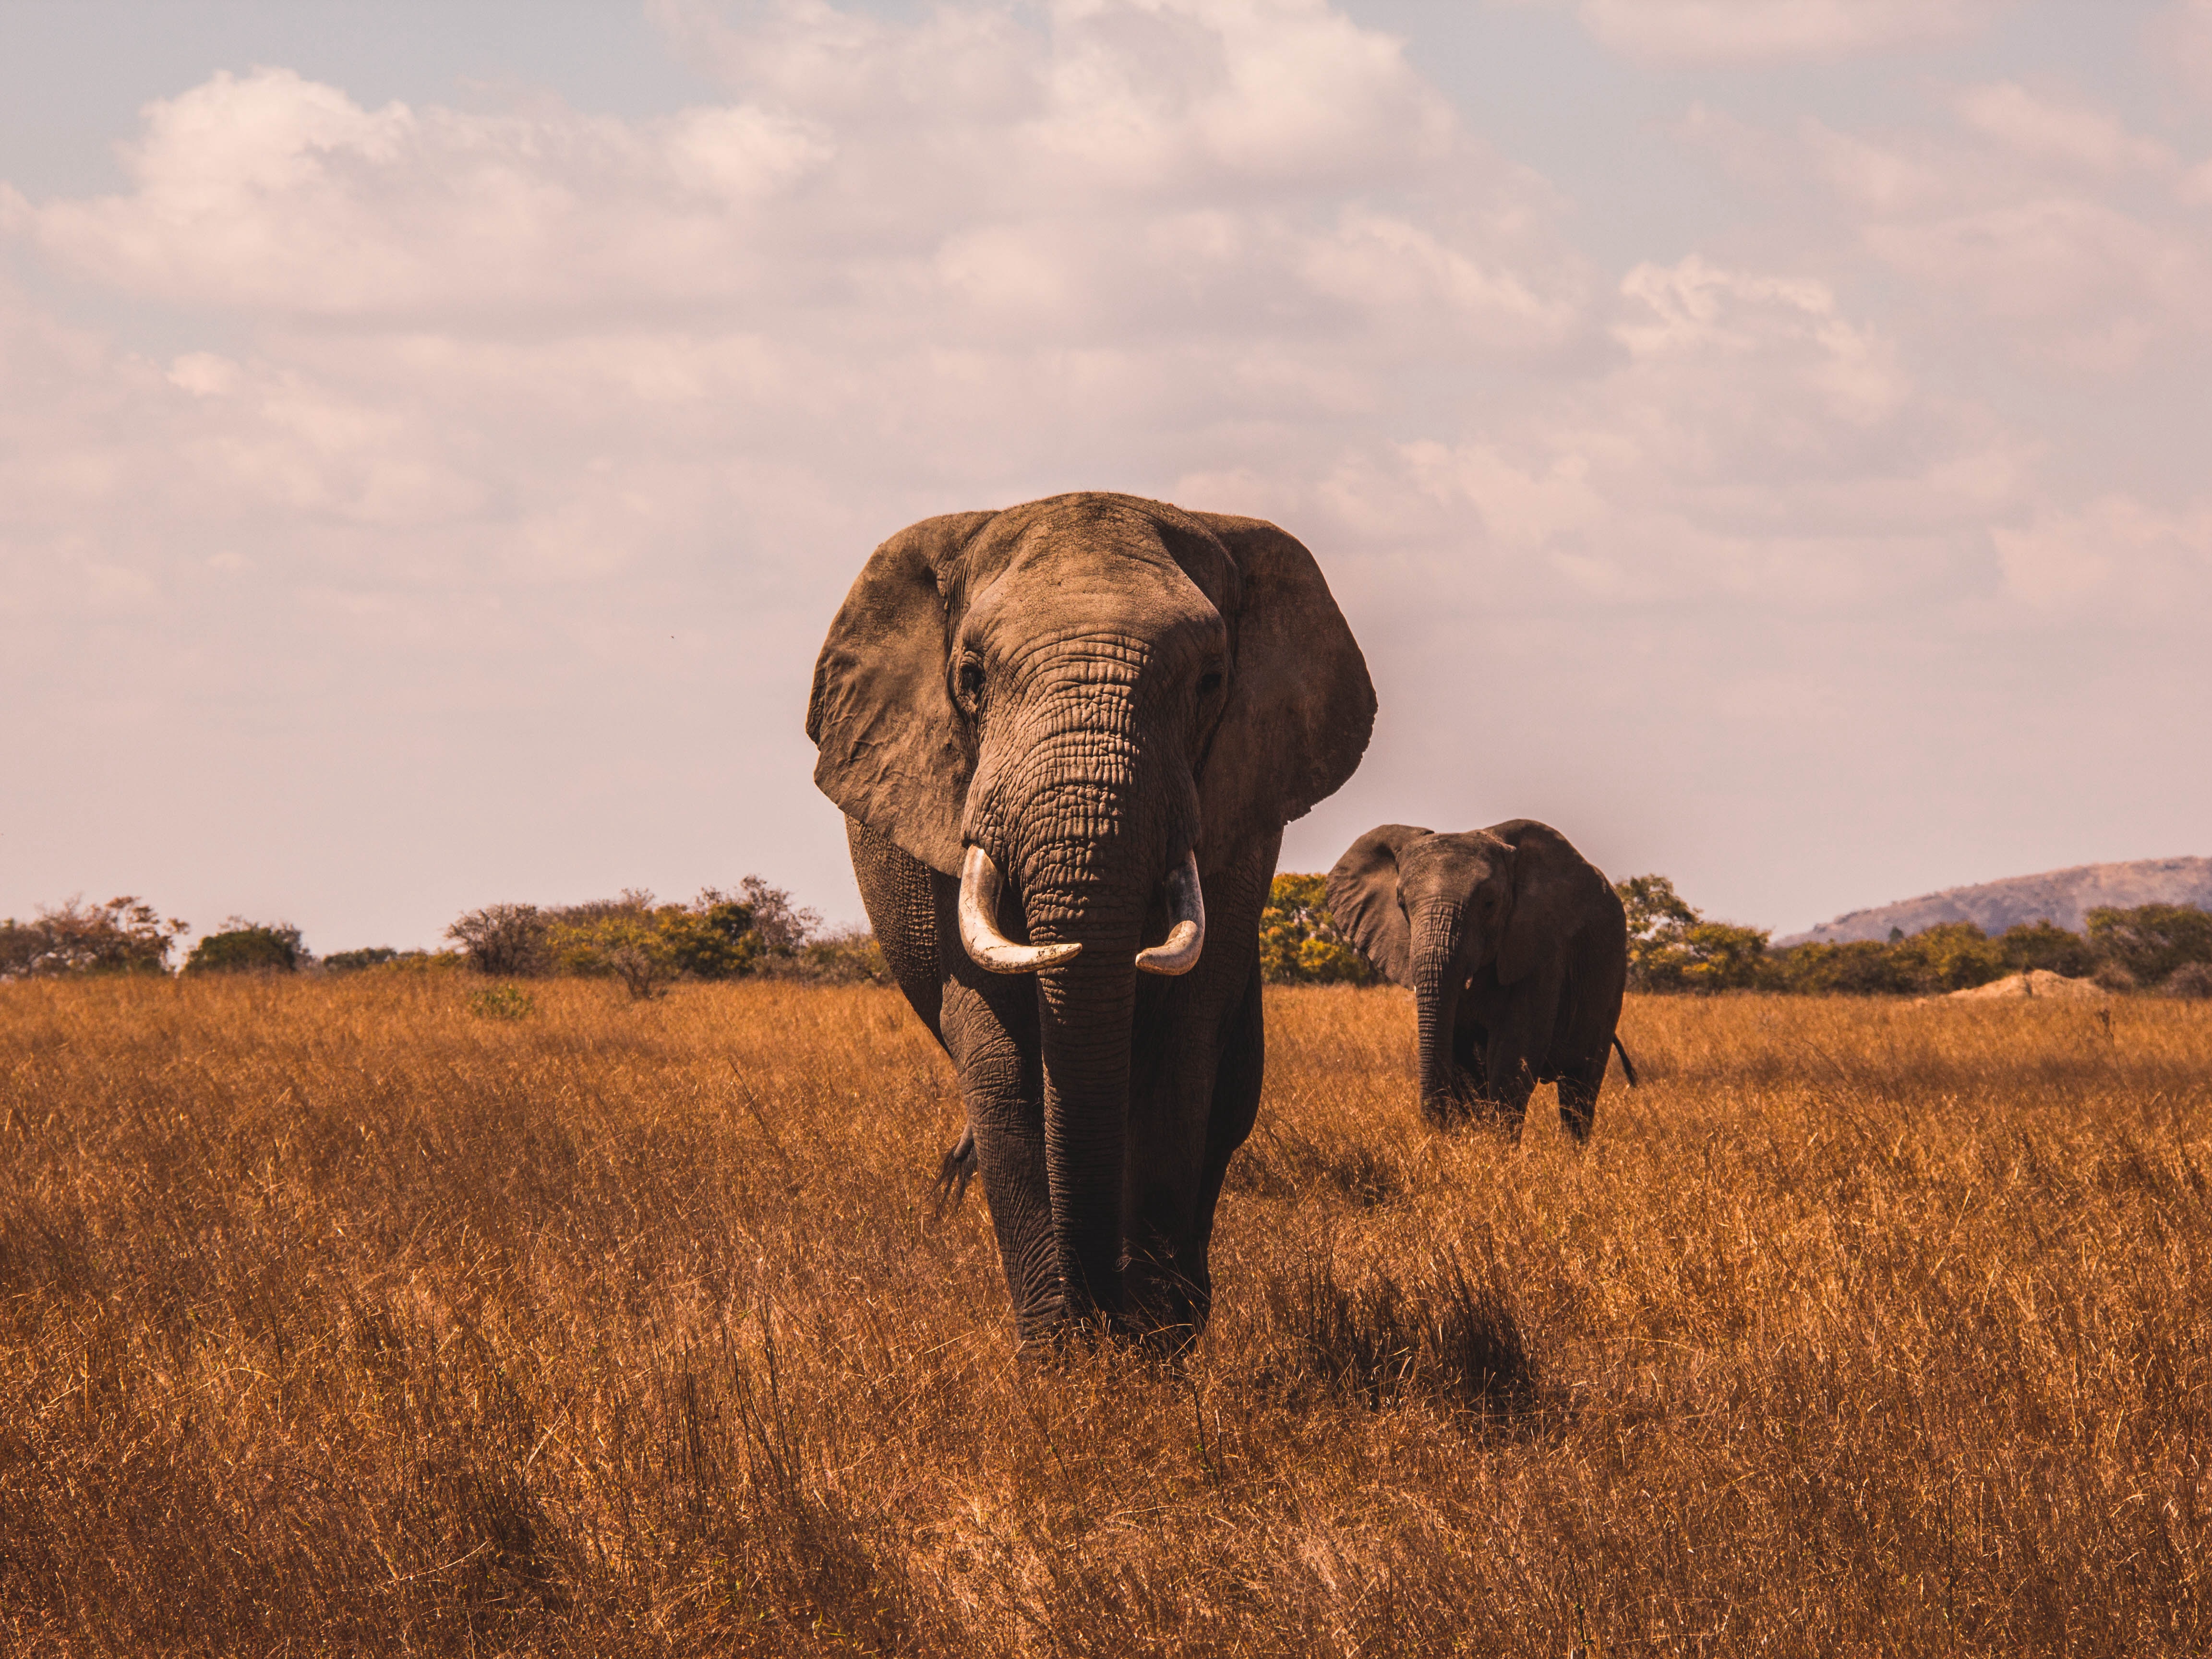 Vibrations offer new way to track elephants